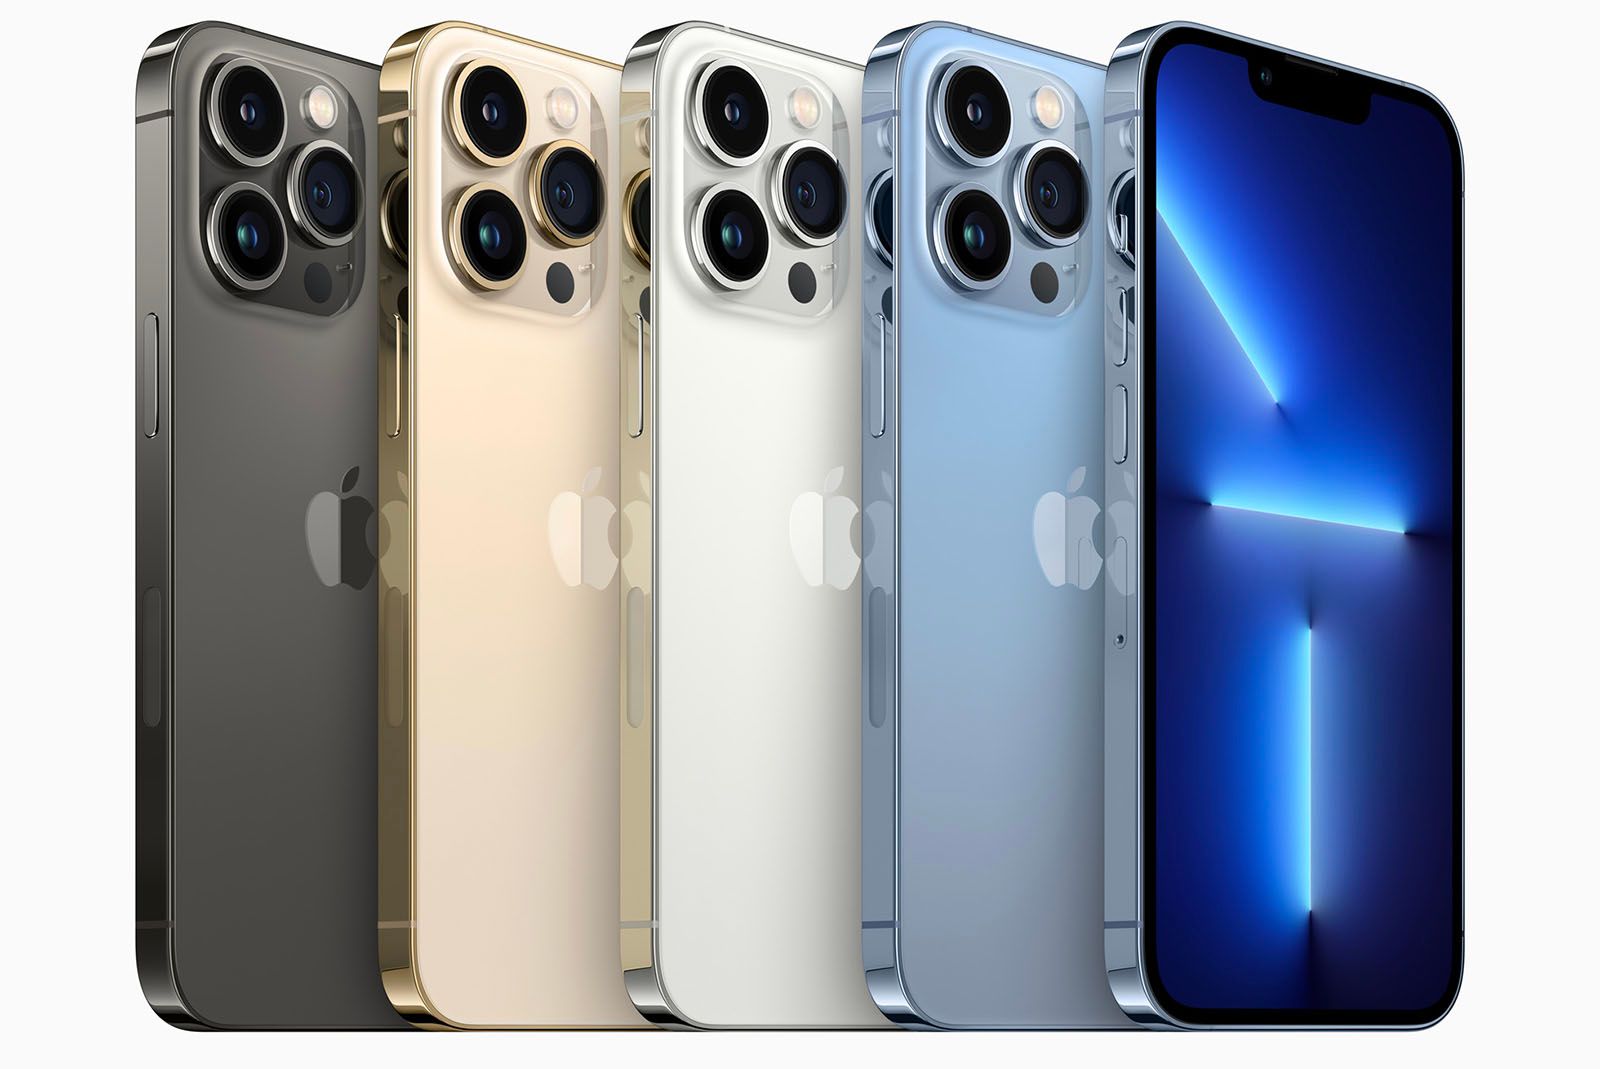 Apple unveils iPhone 13 Pro and iPhone 13 Pro Max with smaller notch, A15 Bionic and ProMotion display photo 1